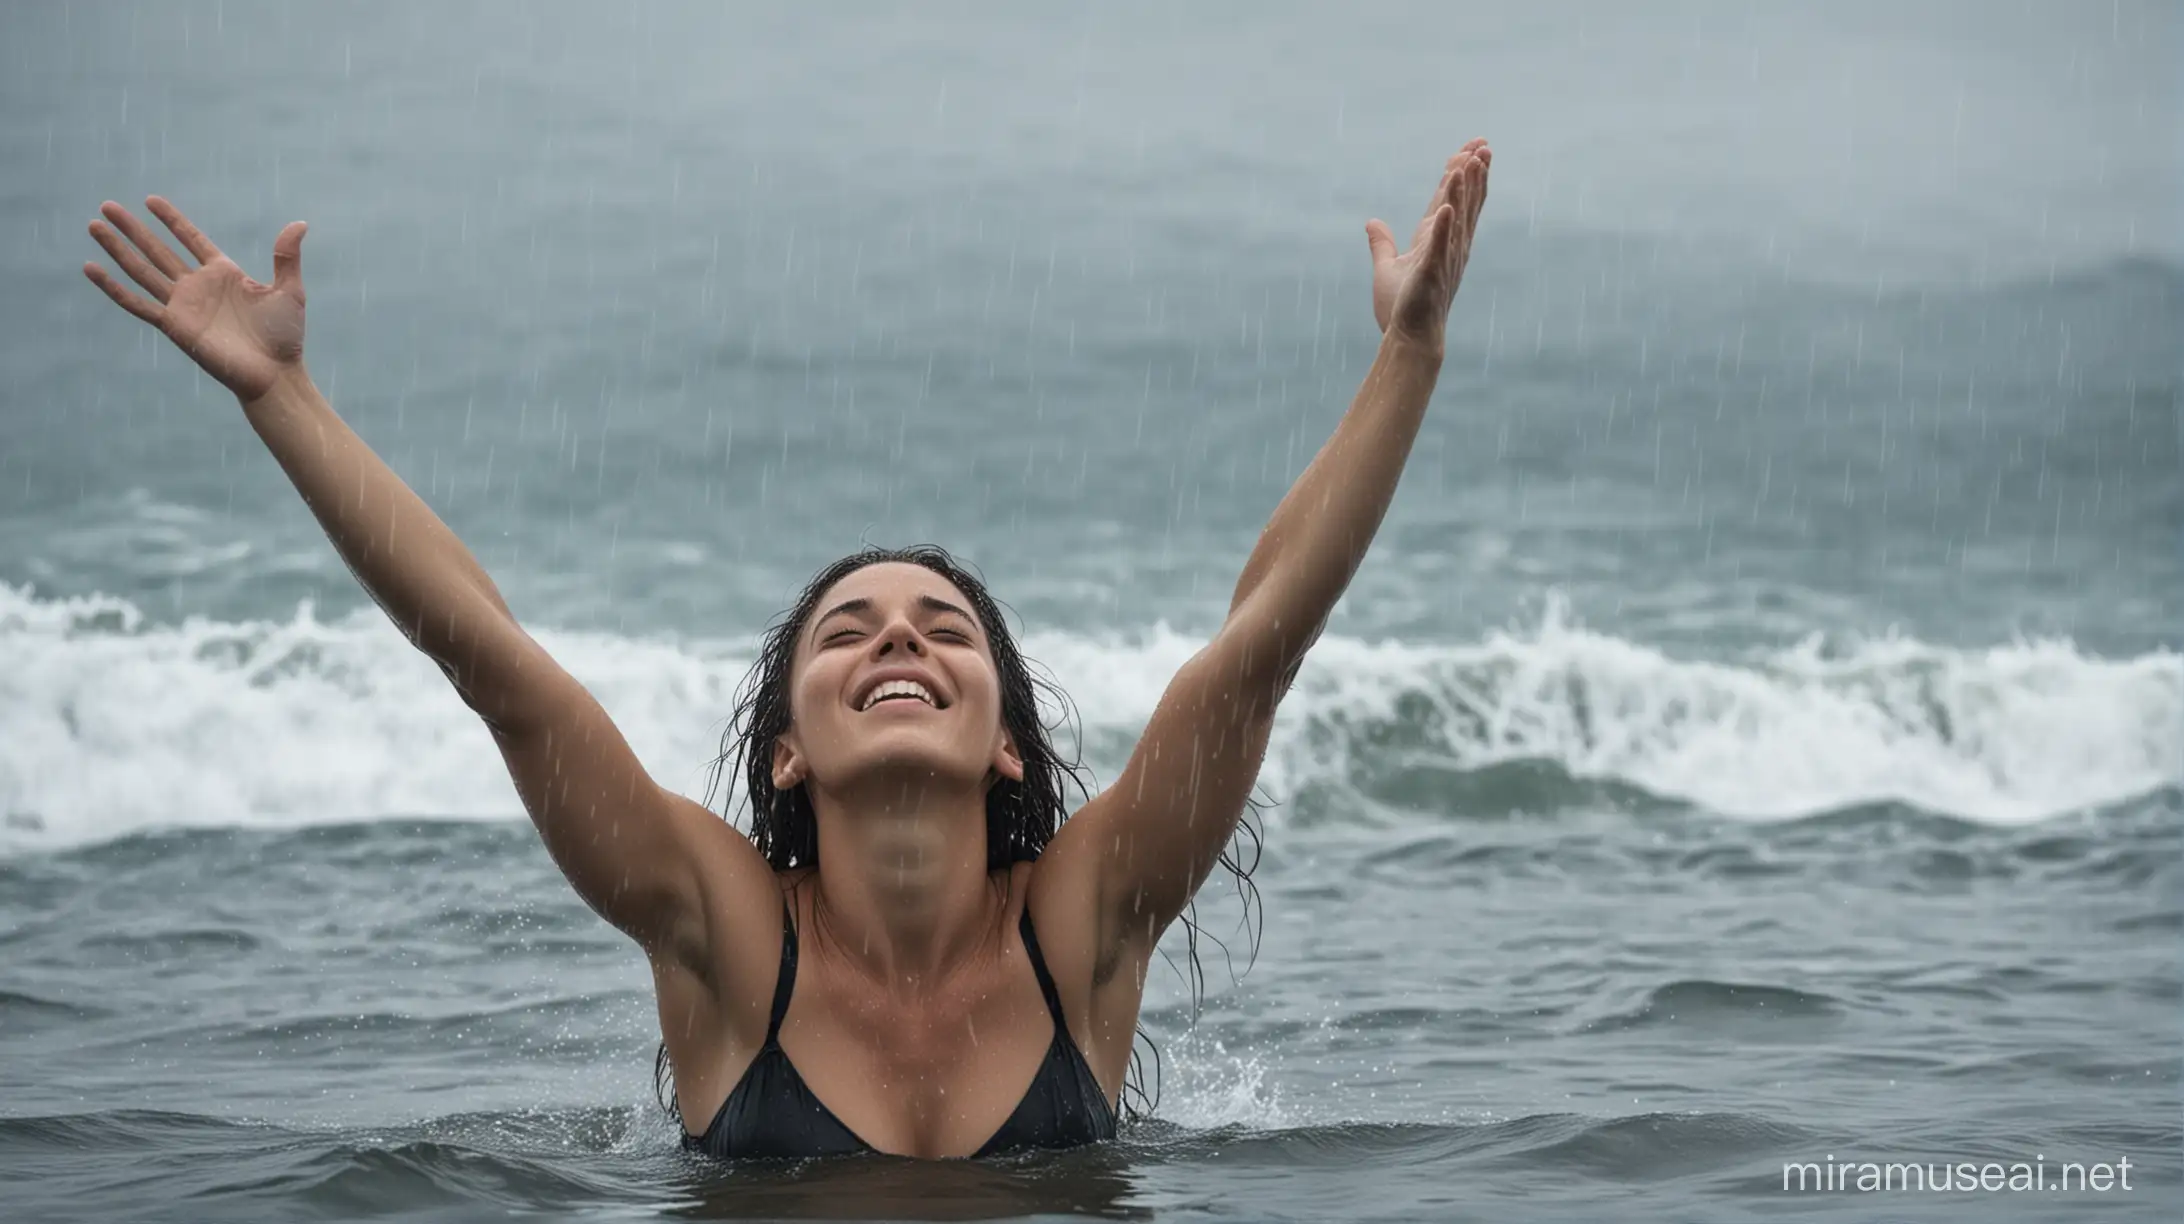 A woman in the ocean, arms raised in the air, head up, eyes closed, rain falling on her